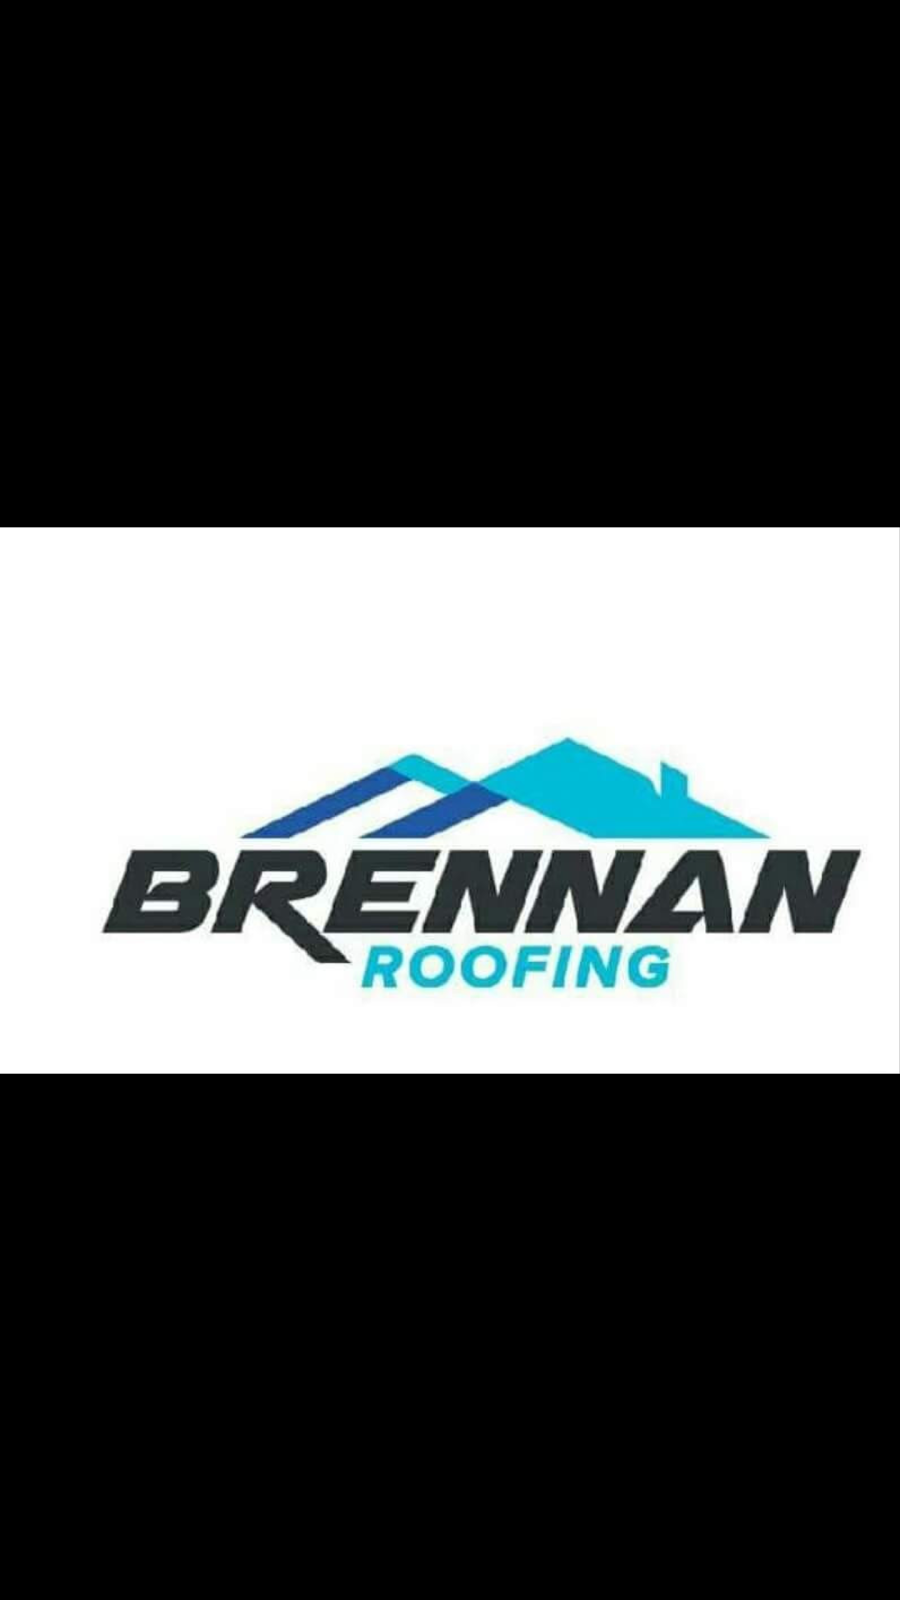 Brennans Roofing | roofing contractor | Hillside Park, Rowville VIC 3178, Australia | 0434101618 OR +61 434 101 618